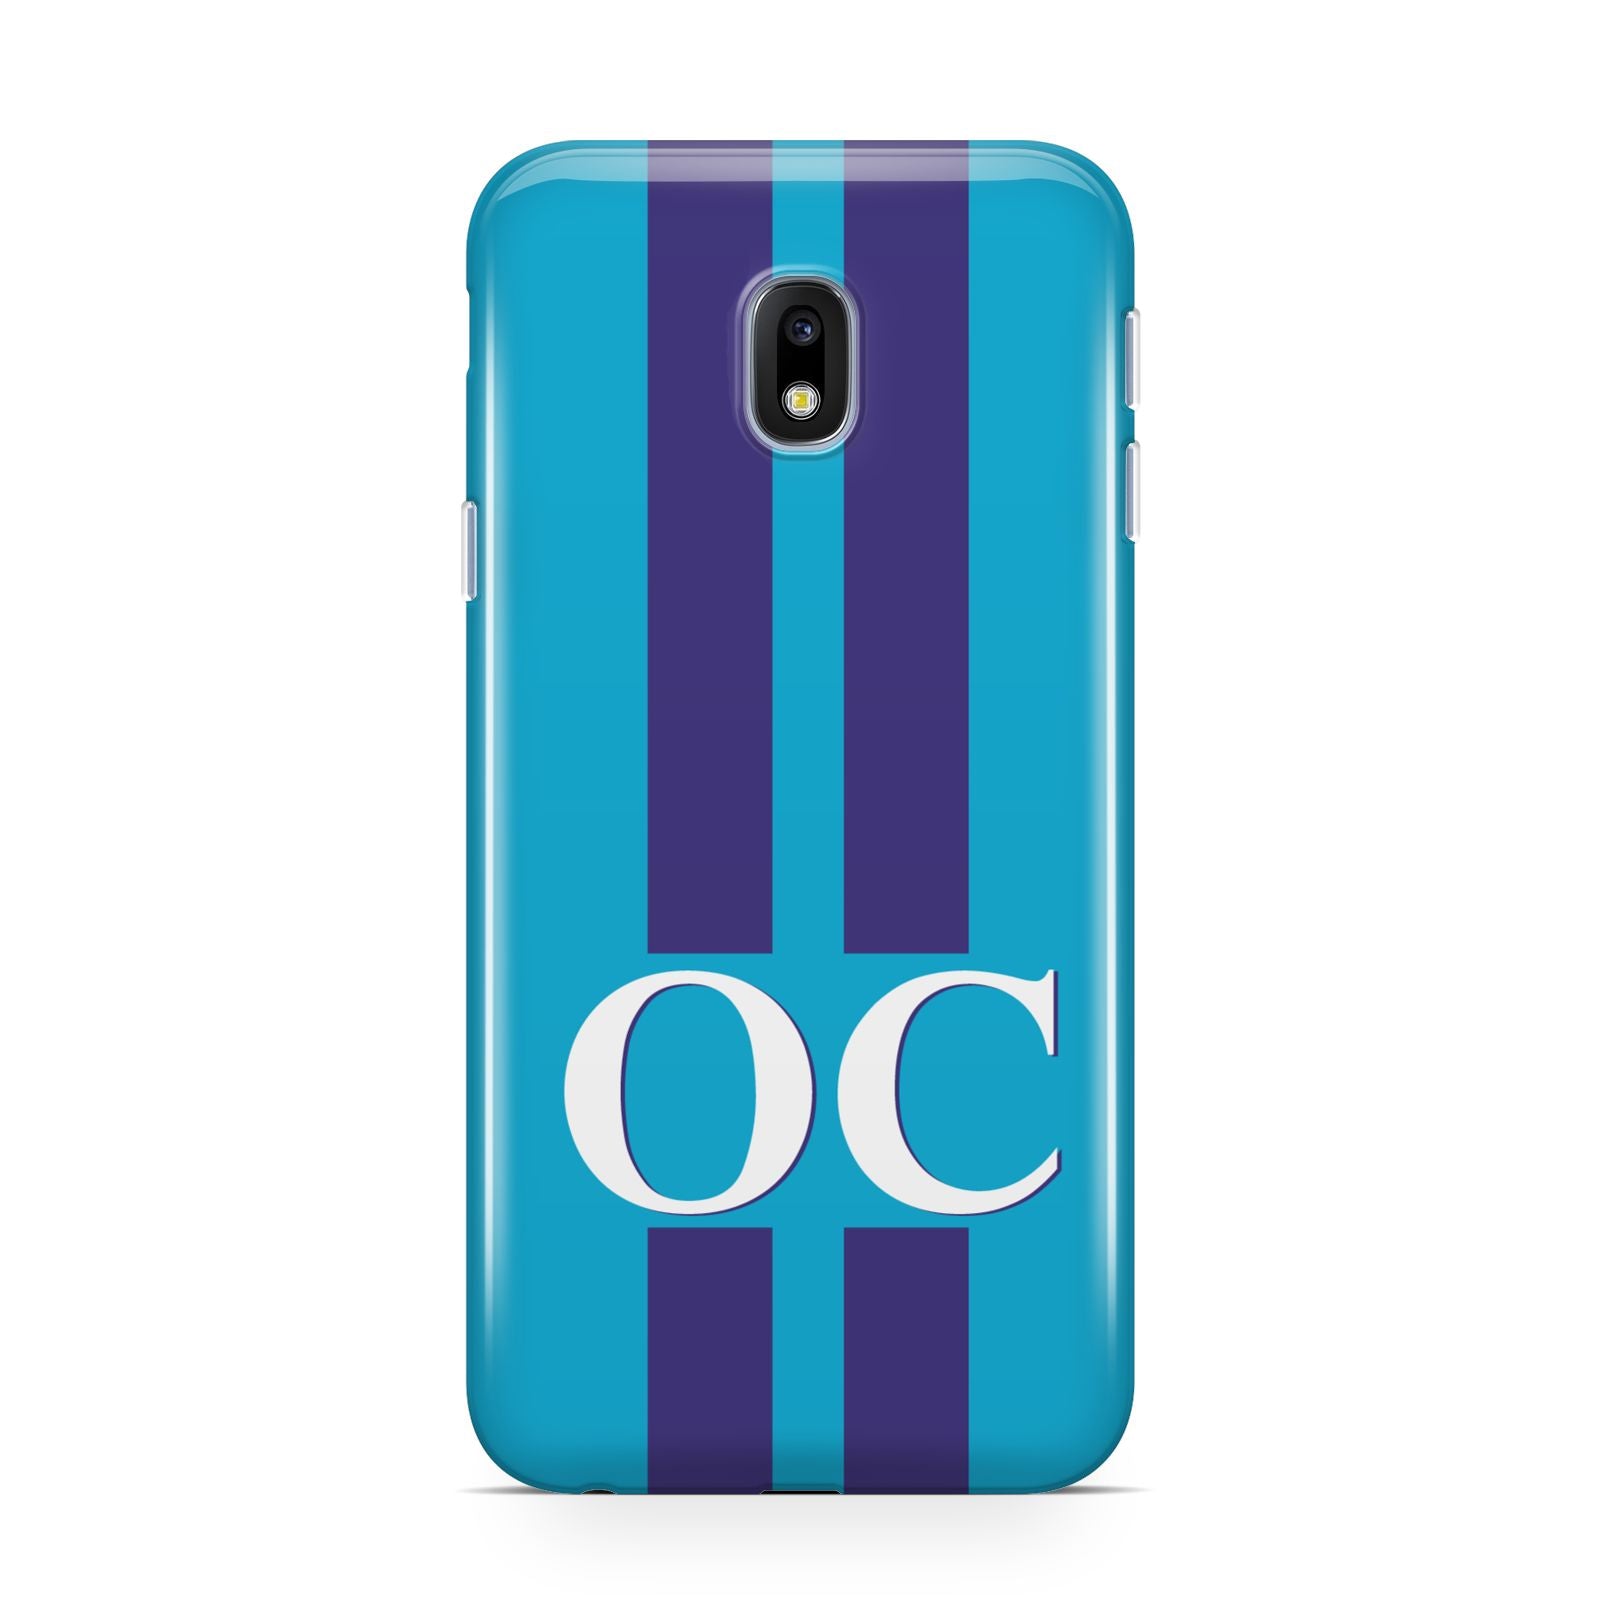 Turquoise Personalised Samsung Galaxy J3 2017 Case